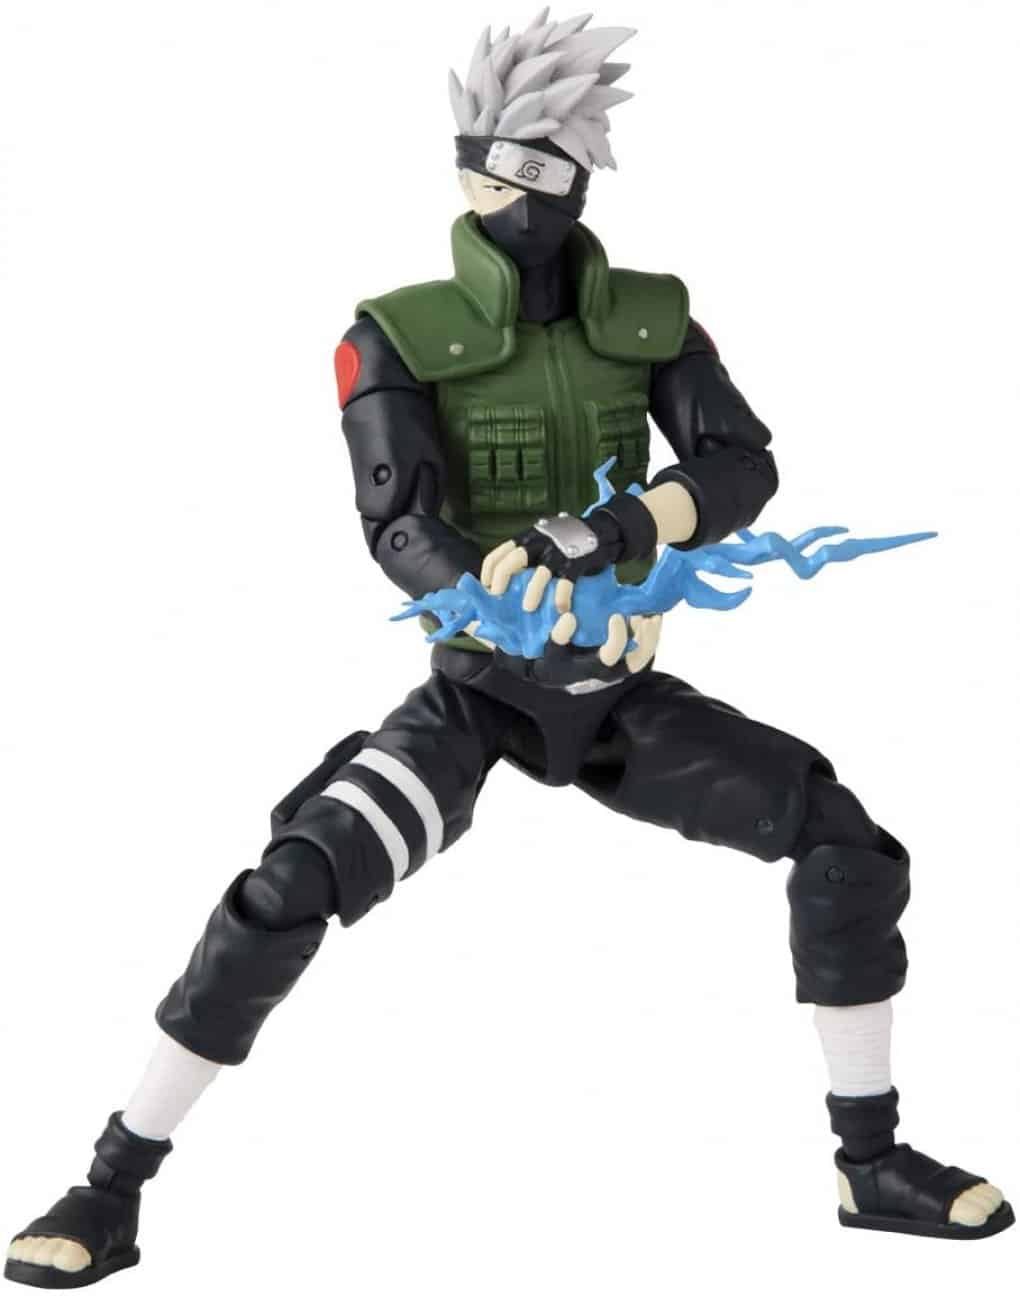 On Prime Day 2022, Kakashi from Naruto can be bought cheaply as a figure on Amazon.